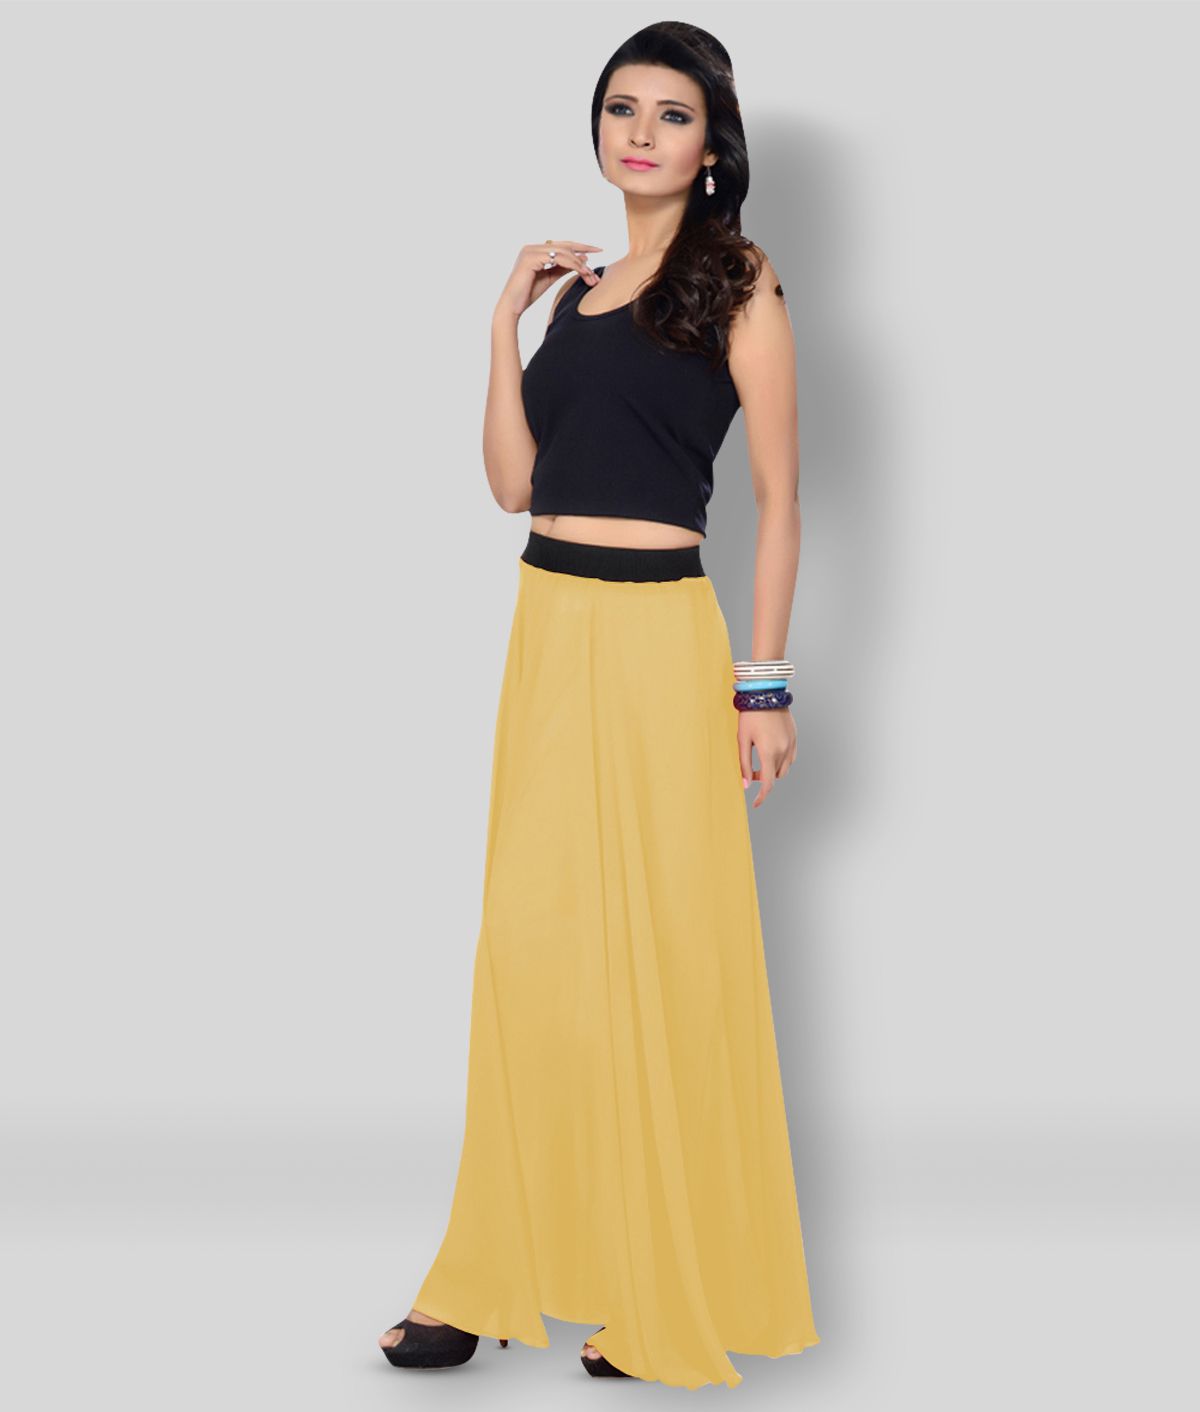     			Sttoffa - Yellow Georgette Women's A-Line Skirt ( Pack of 1 )